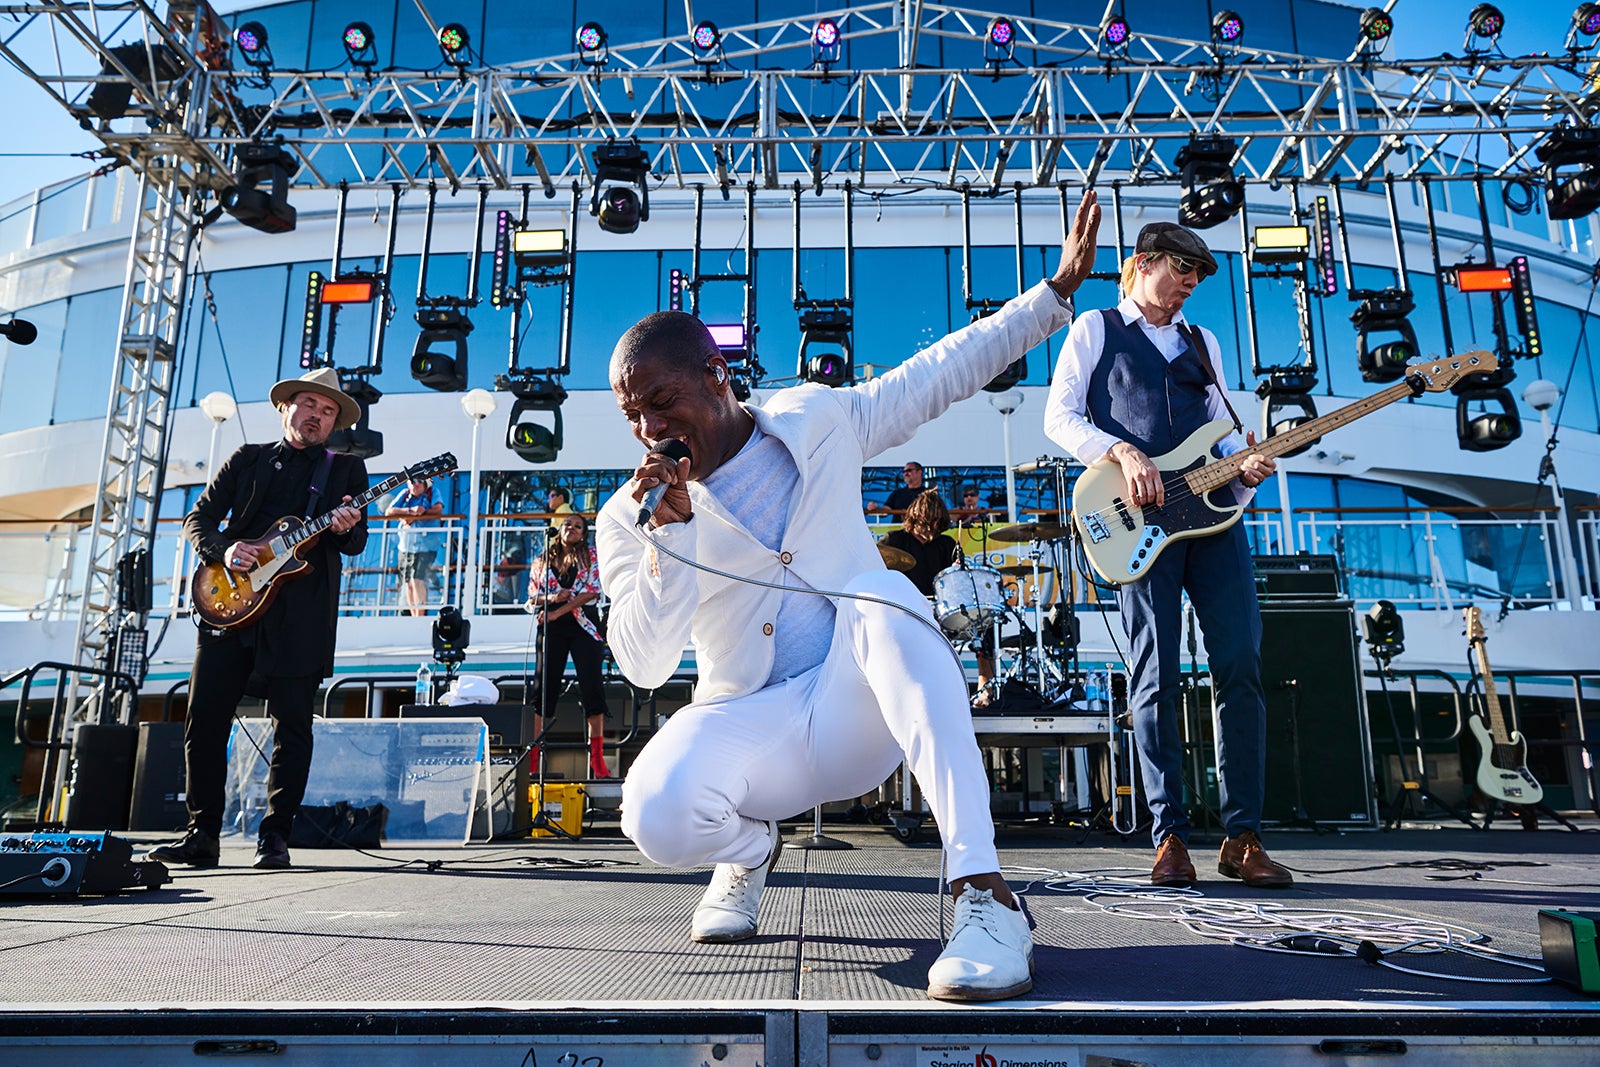 MEDITERRANEAN SEA - AUGUST 18: (L-R) Nalle Colt, Ty Taylor and Rick Barrio Dill of American R&amp;B group Vintage Trouble performing live on stage during the Keeping The Blues Alive At Sea event on board the Norwegian Pearl cruise ship in the Mediterranean, on August 18, 2019.